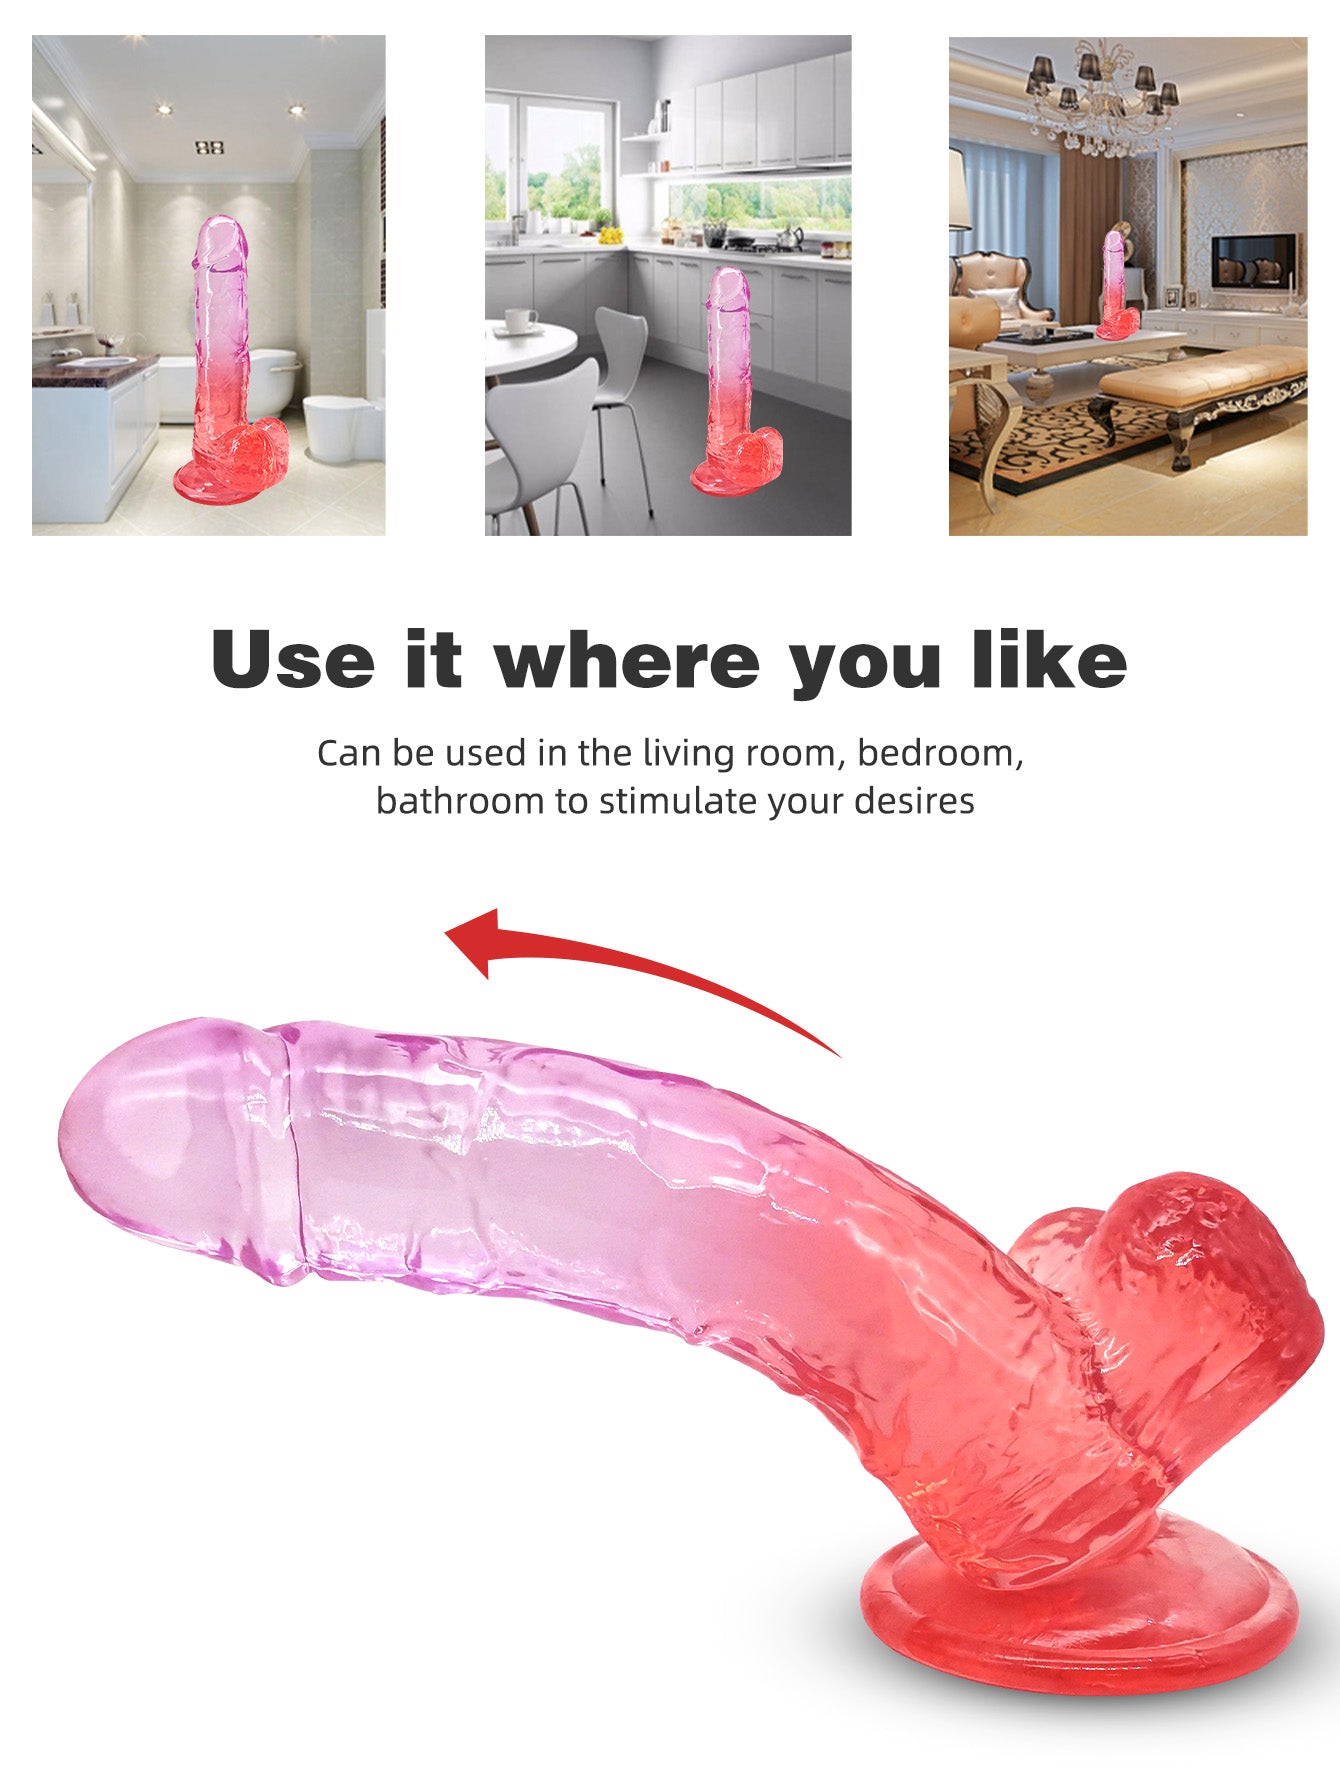 Jelly Soft Realistic Dildos for Women - Lifelike Mixed Color Dildo with Big Suctiion Cup